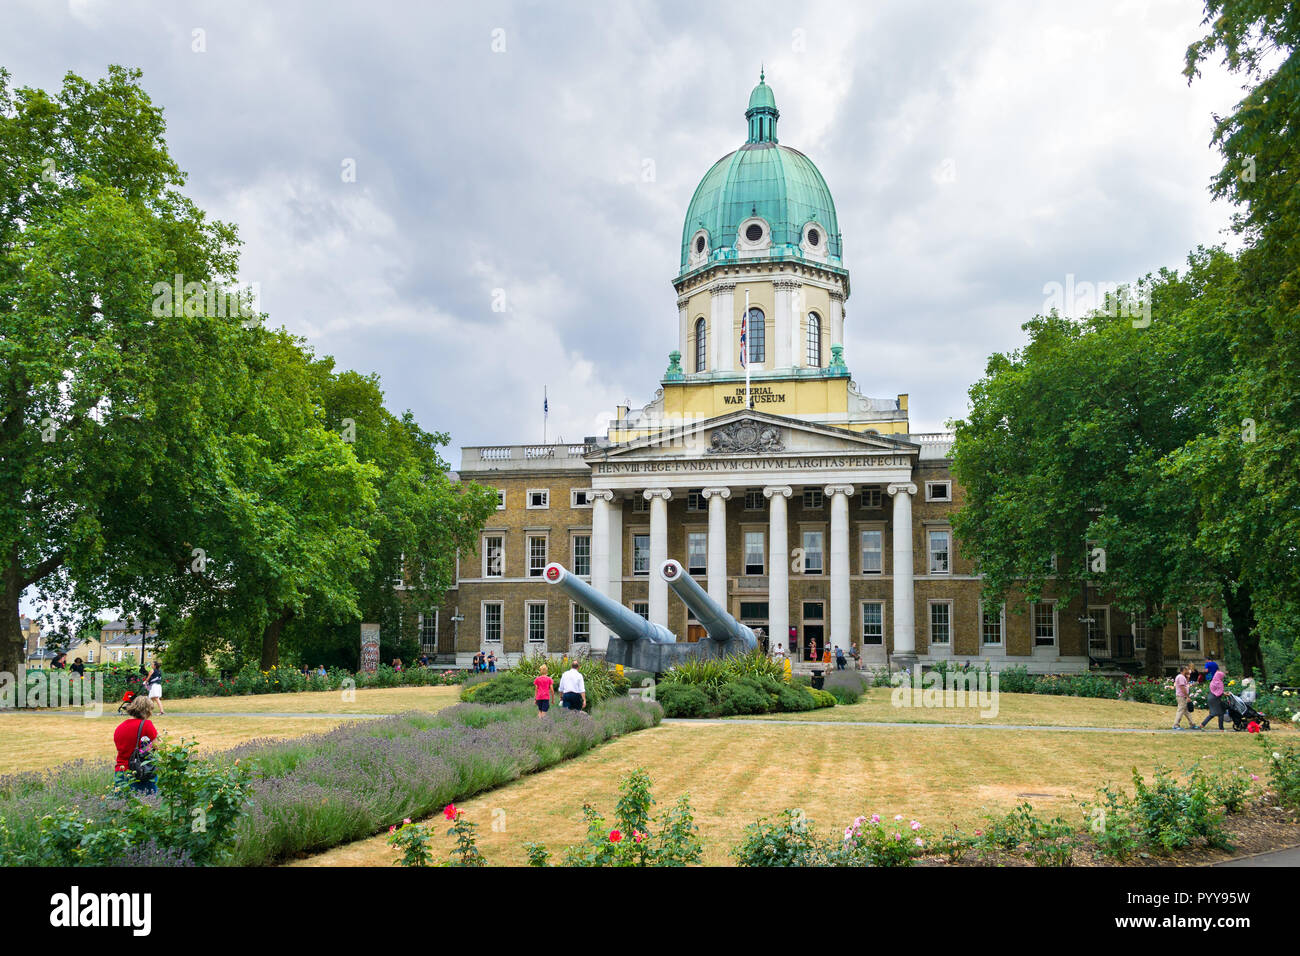 Exterior view of the Imperial War Museum with 15 inch naval guns in foreground, Lambeth Road, Southwark, London, UK Stock Photo